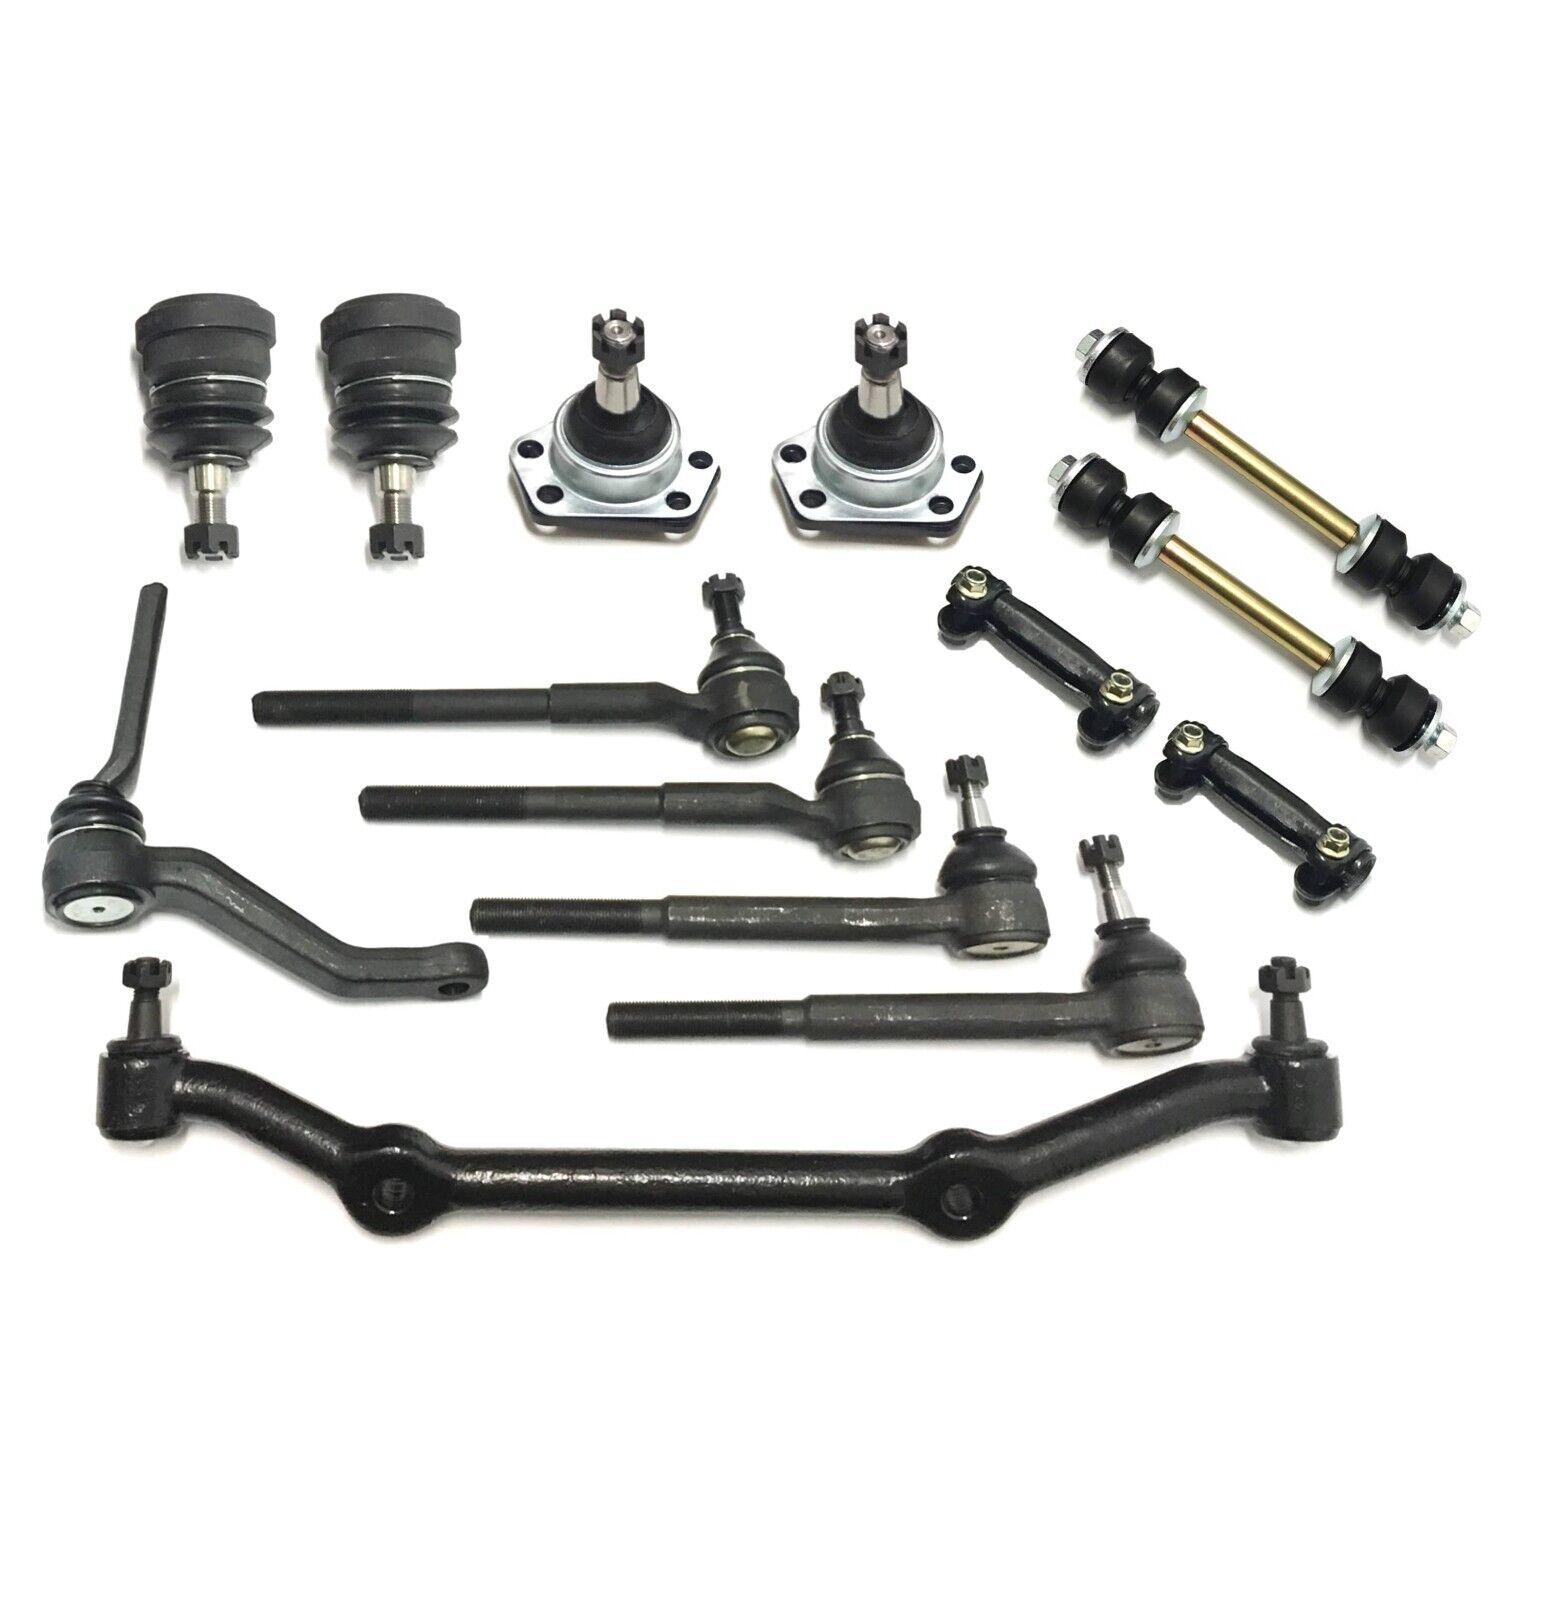 New 14 Pc Complete Front Suspension Kit for Chevy GMC Truck S-10 Blazer - 2WD